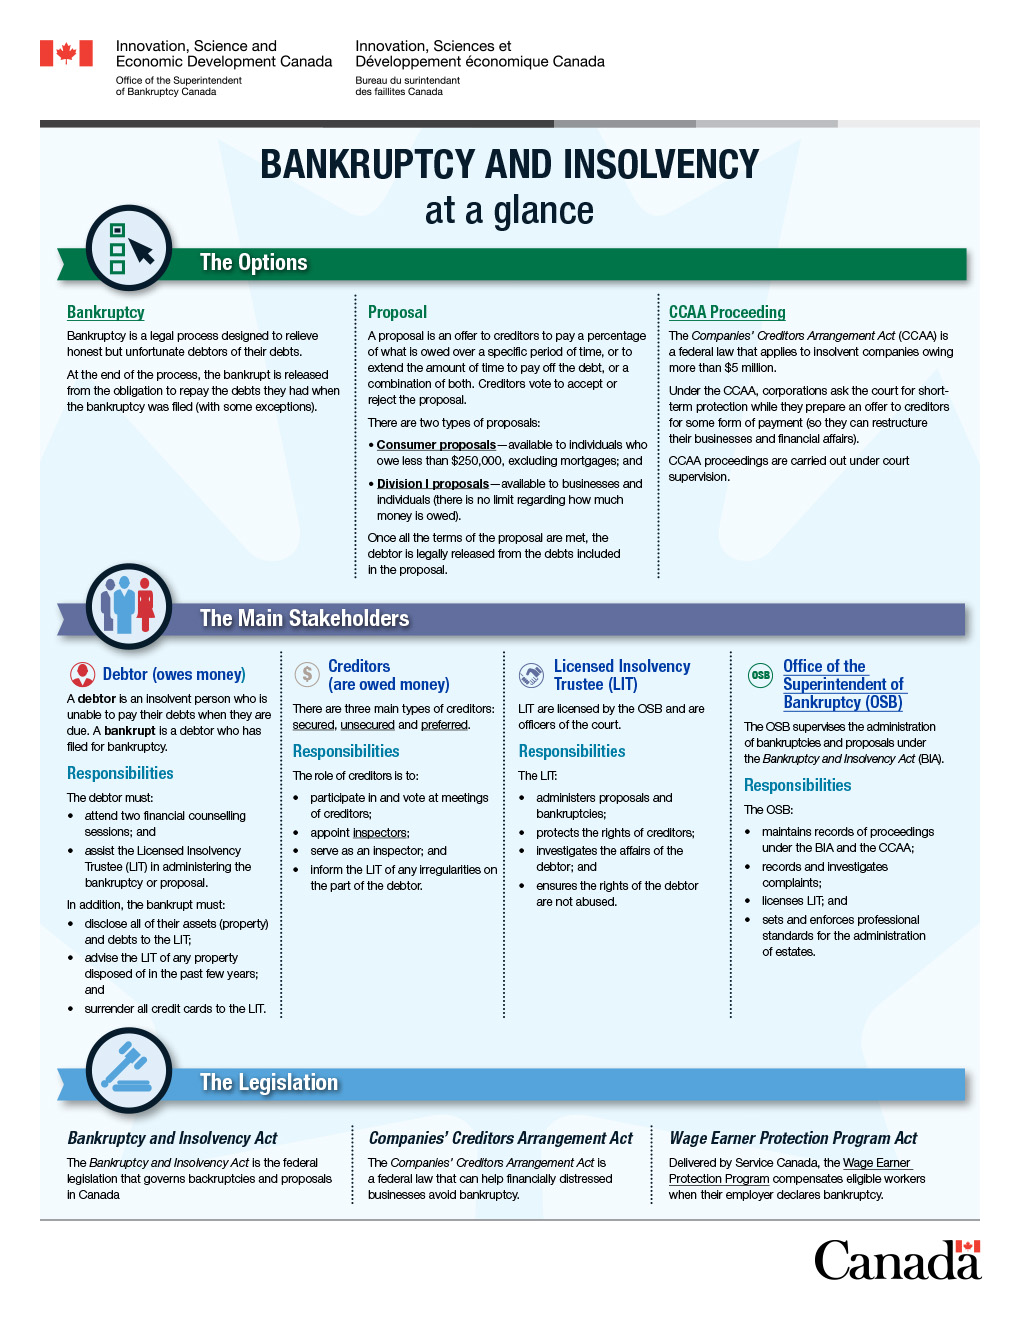 Infographic of Bankruptcy and Insolvency at a glance which presents an overview of the bankruptcy and insolvency system in three sections: (1) The options, (2) The main stakeholders and (3) The legislation. Link to text version located below the image.